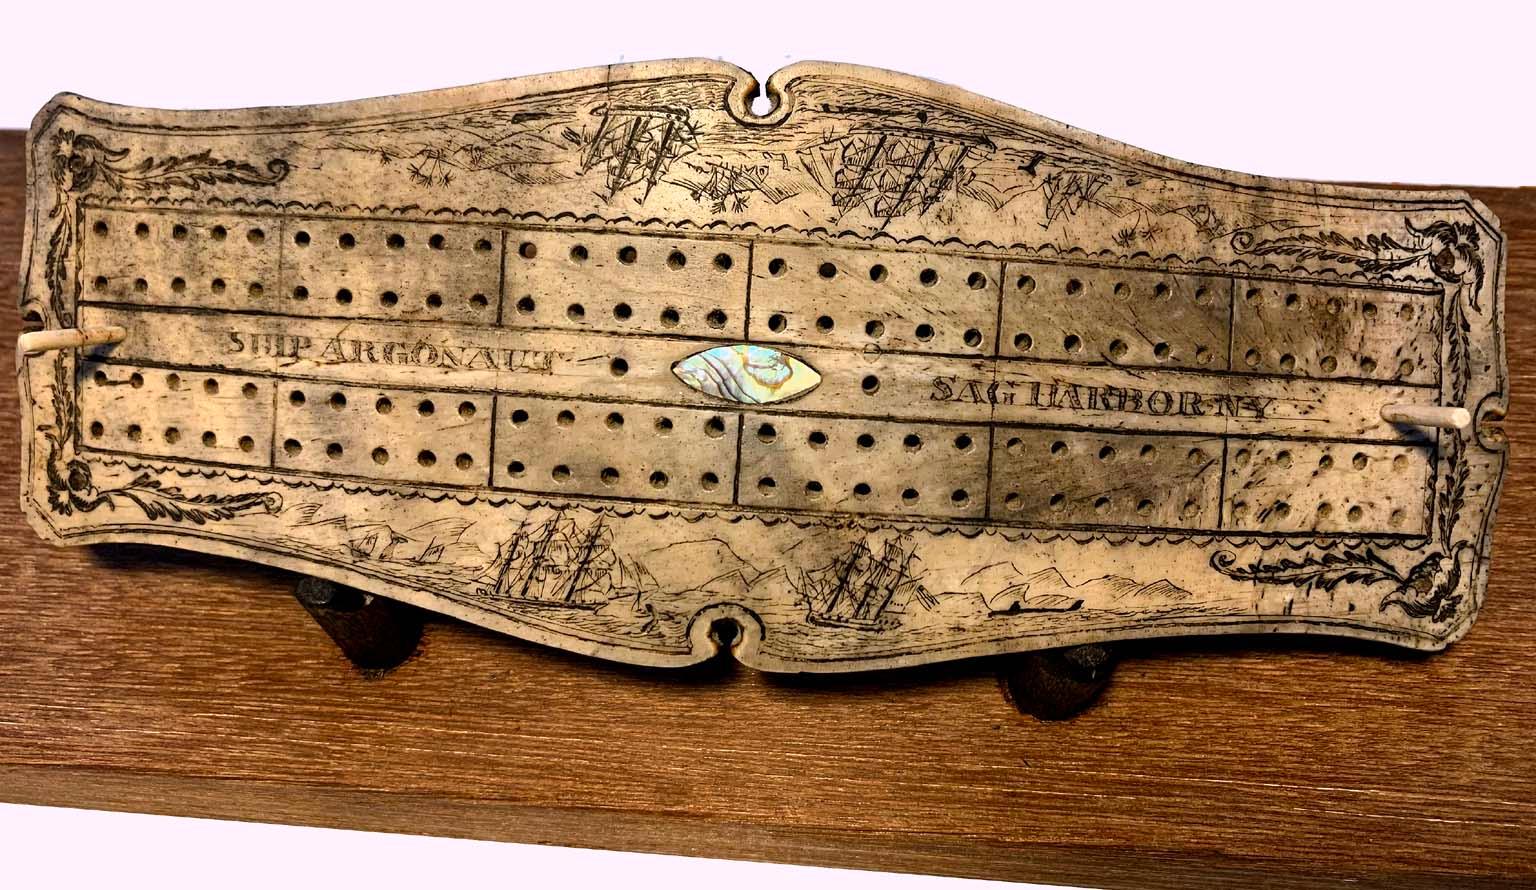 Authentic Scrimshaw carved into and antique tortoise shell with brass legs. Carved aboard the Ship Argonaut. A whaling ship from Sag Harbor New York from 1814-1832. The detailed carving is amazing with multiple ships, whales and alternating back